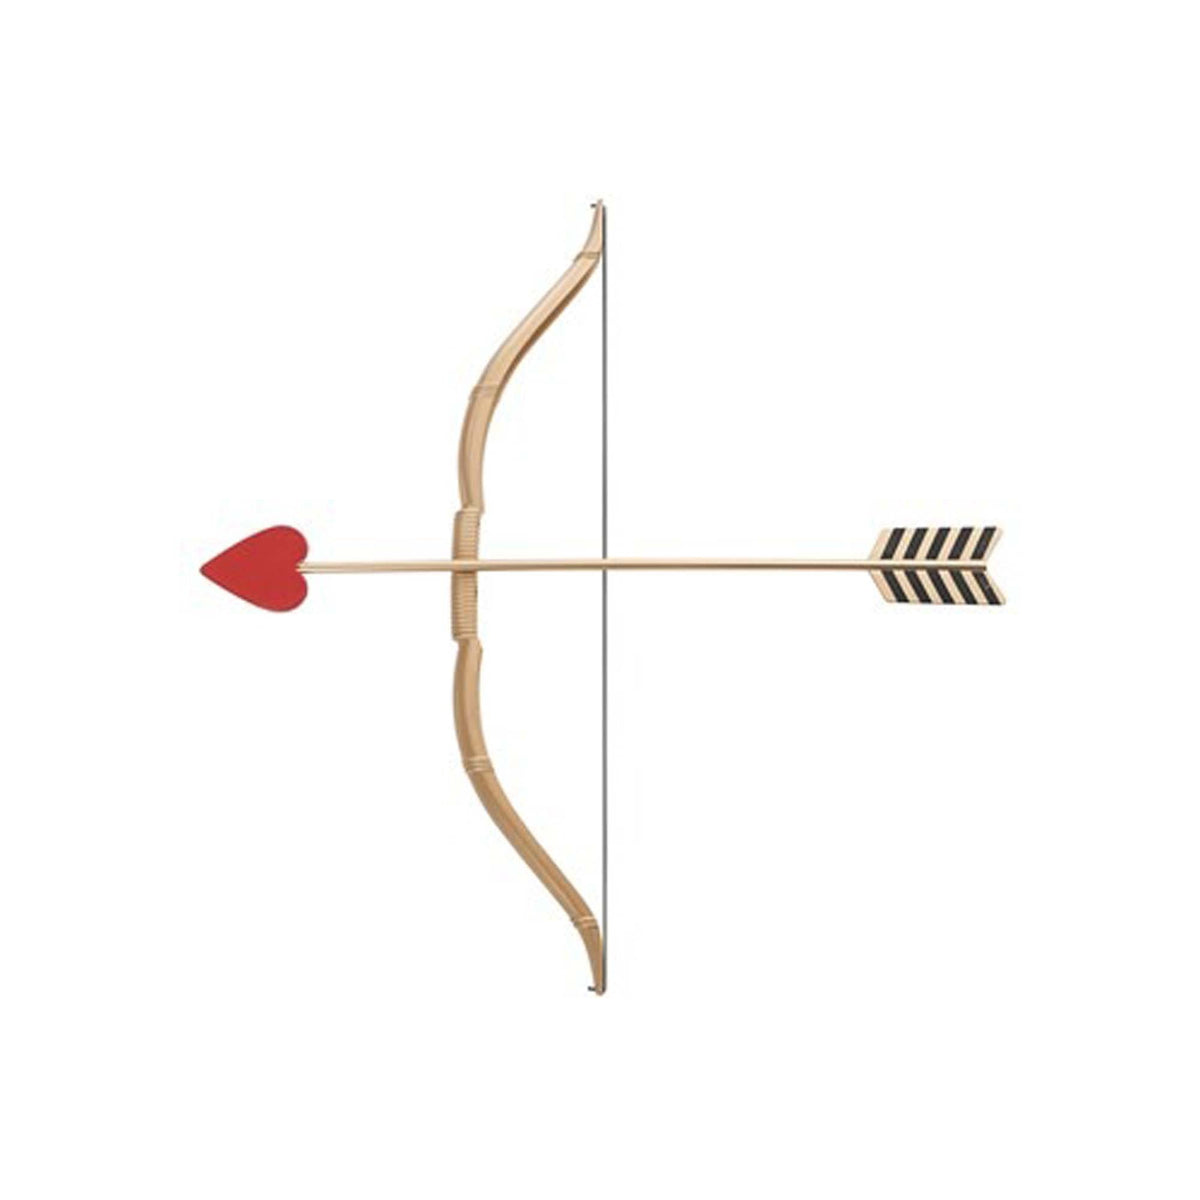 CALIFORNIA COSTUMES Valentine's Day Mini Bow and Arrow Set, 1 Count